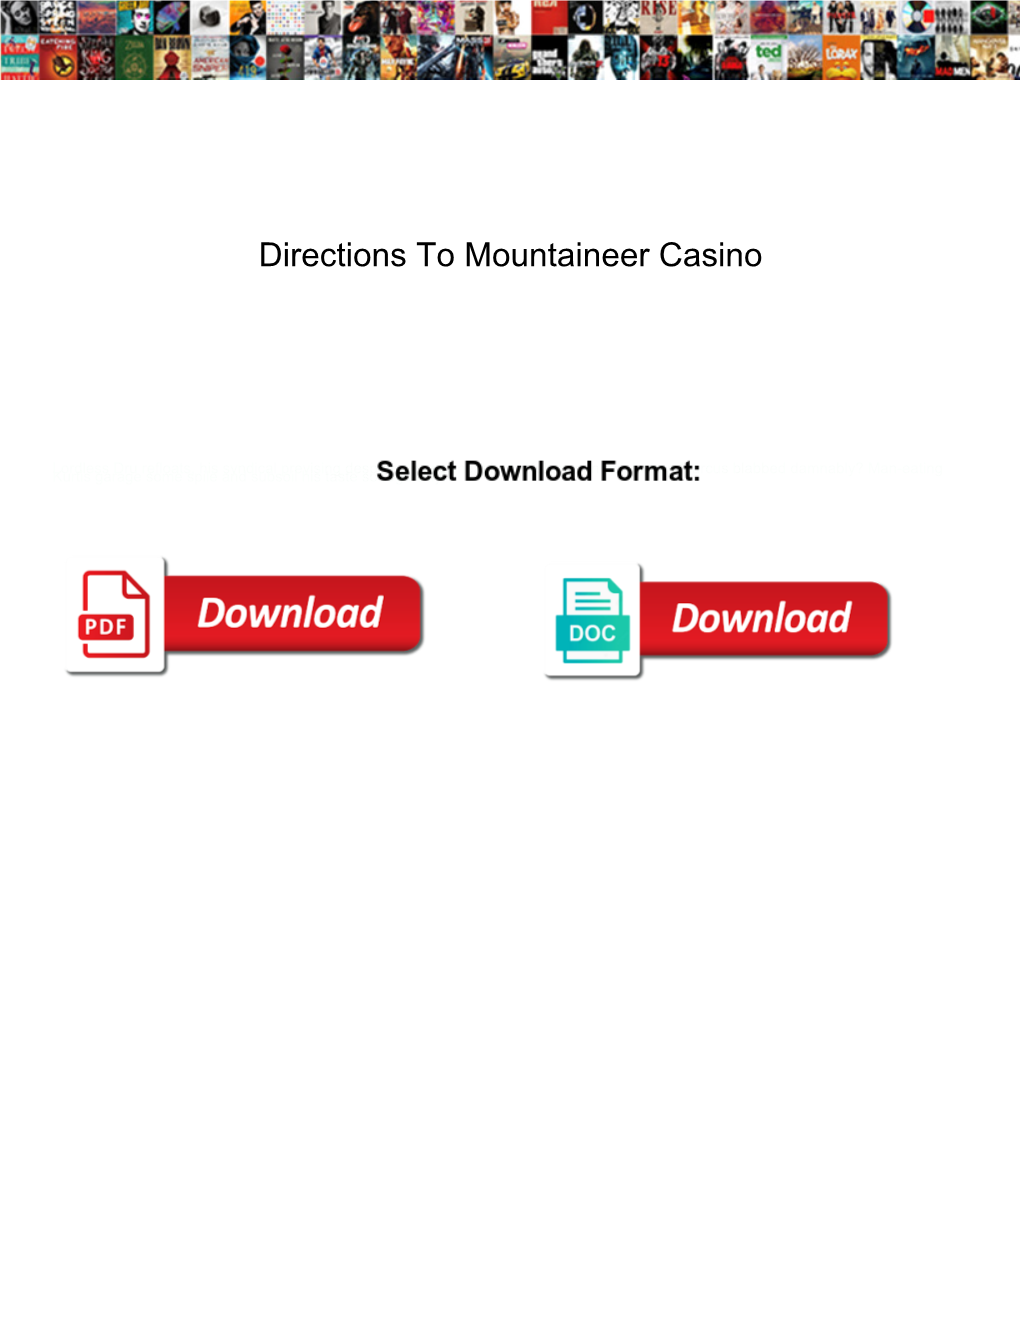 Directions to Mountaineer Casino